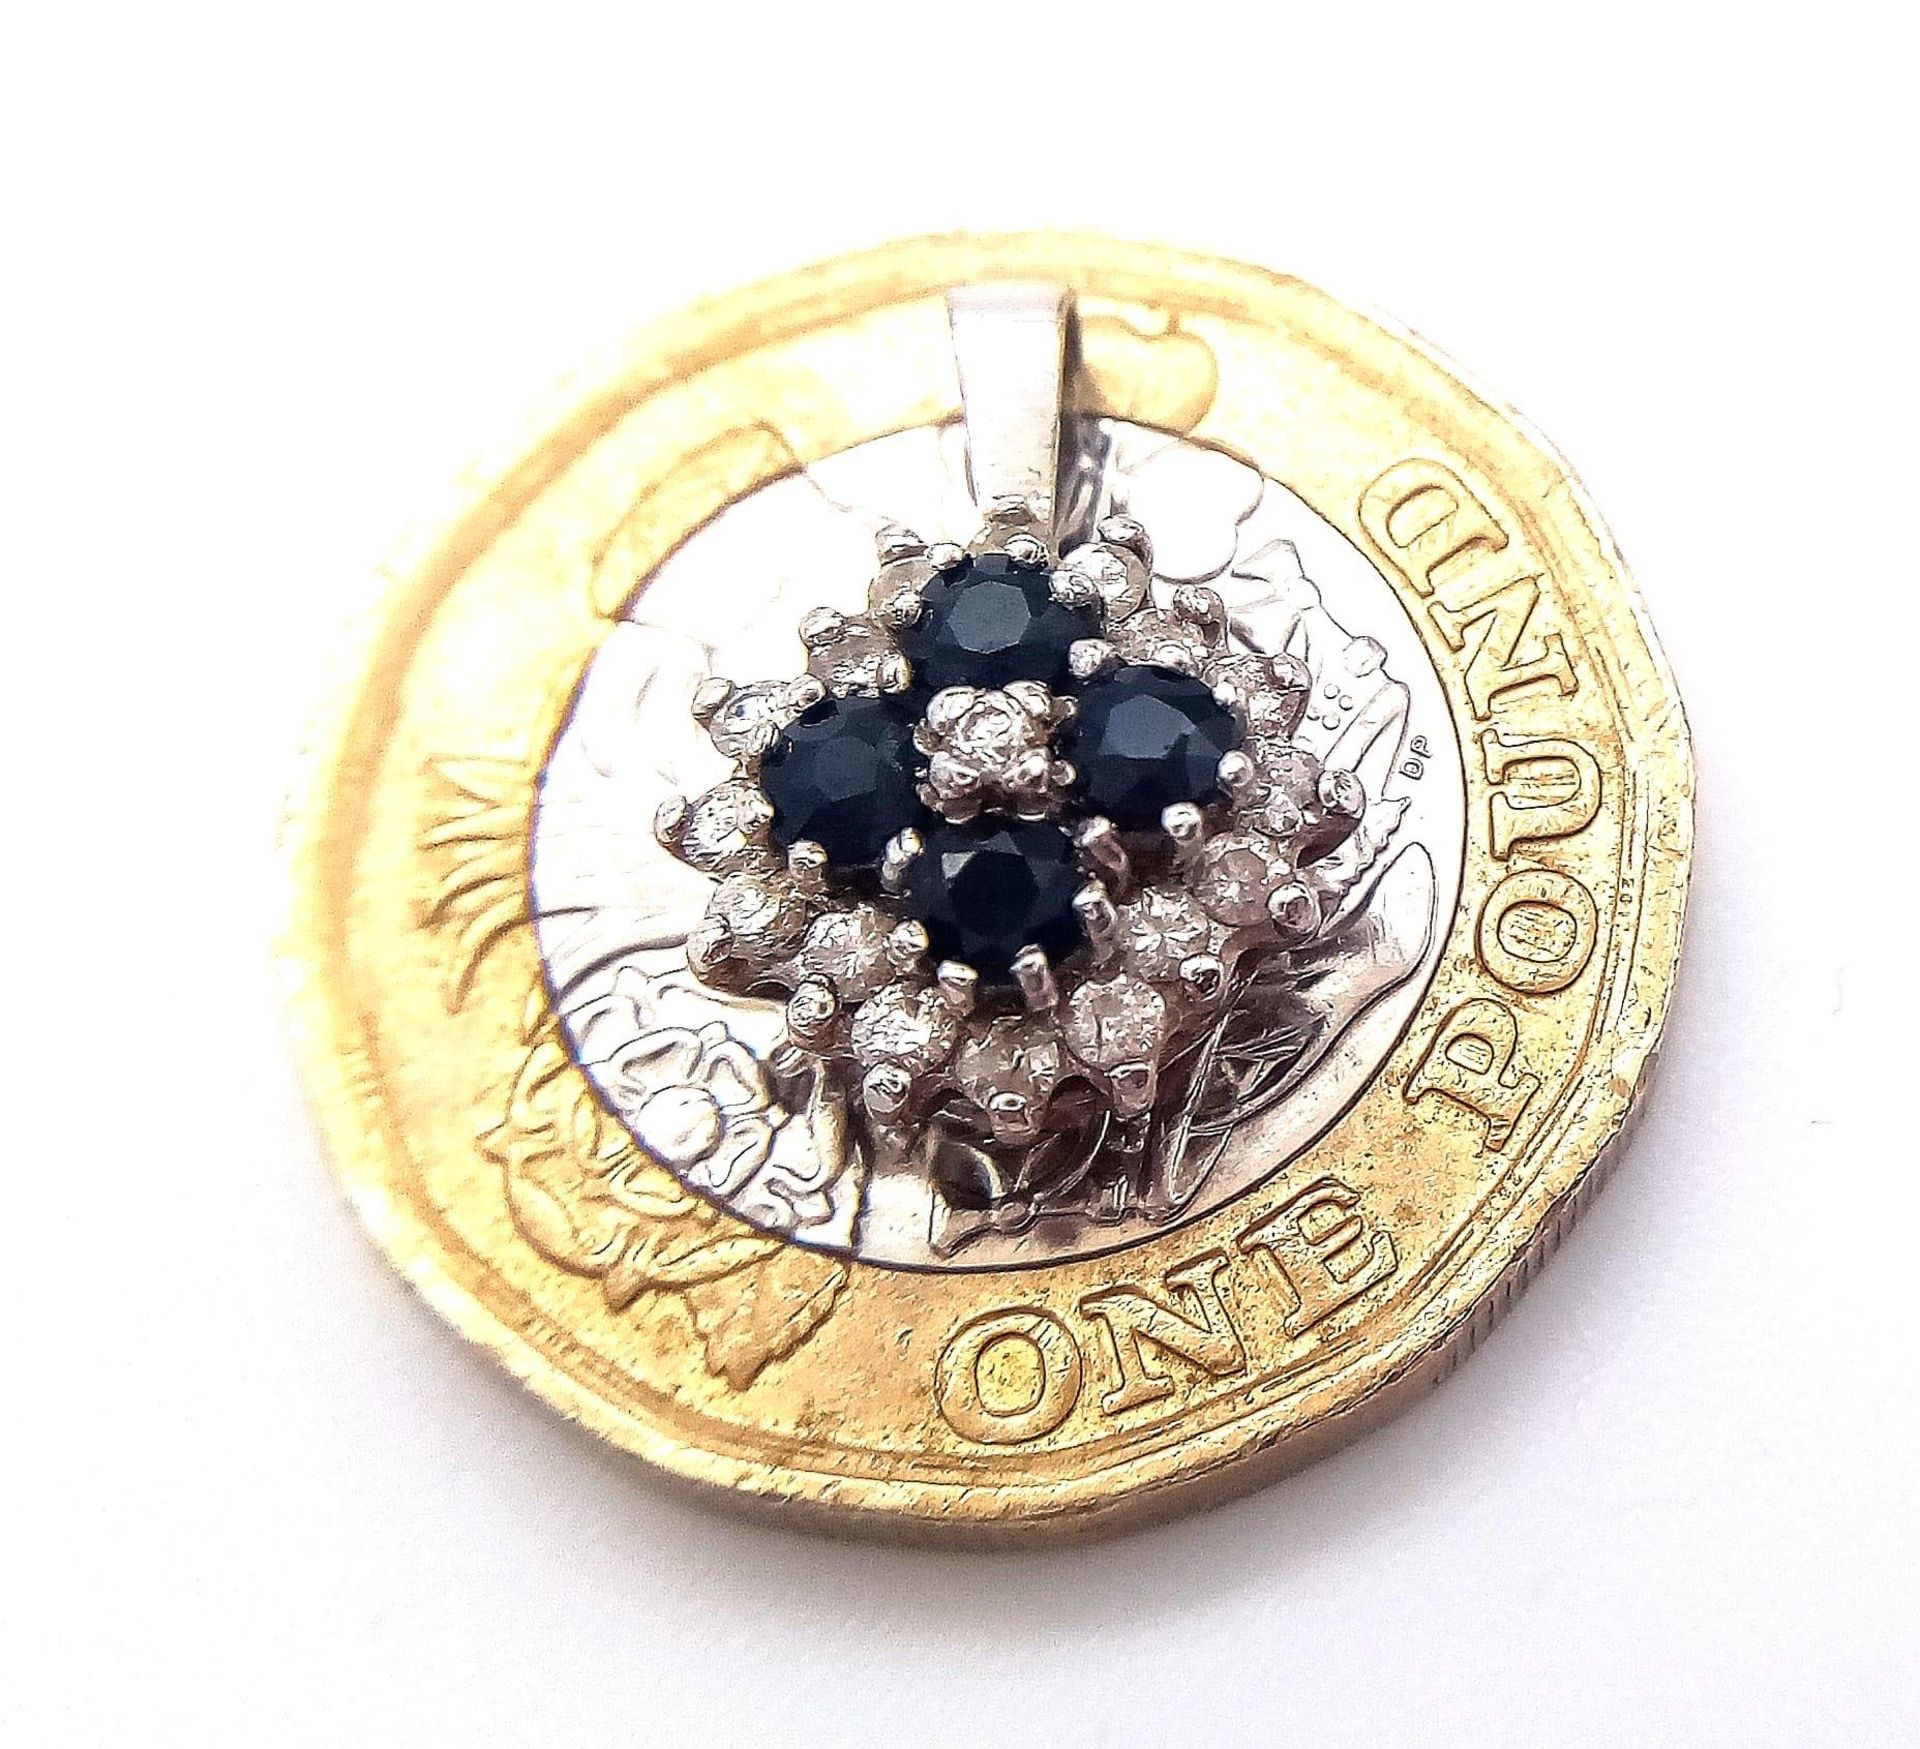 A 9K Gold Diamond and Sapphire Pendant with Matching Stud Earrings. 17mm pendant. 2.55g total - Image 7 of 11